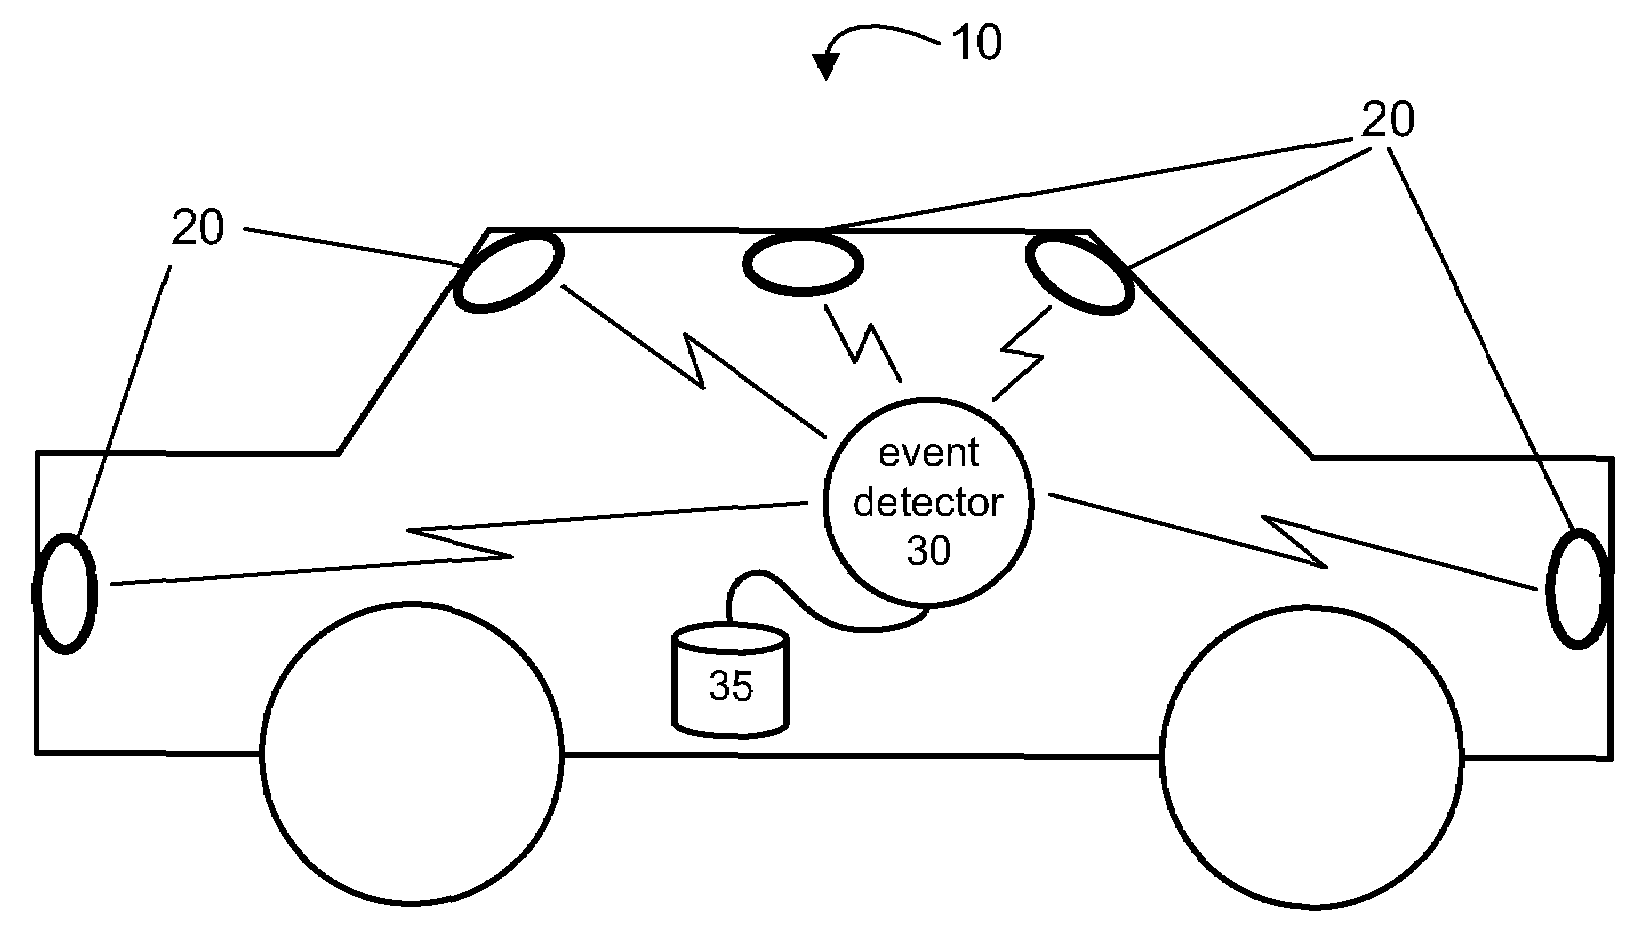 System and method for taking risk out of driving